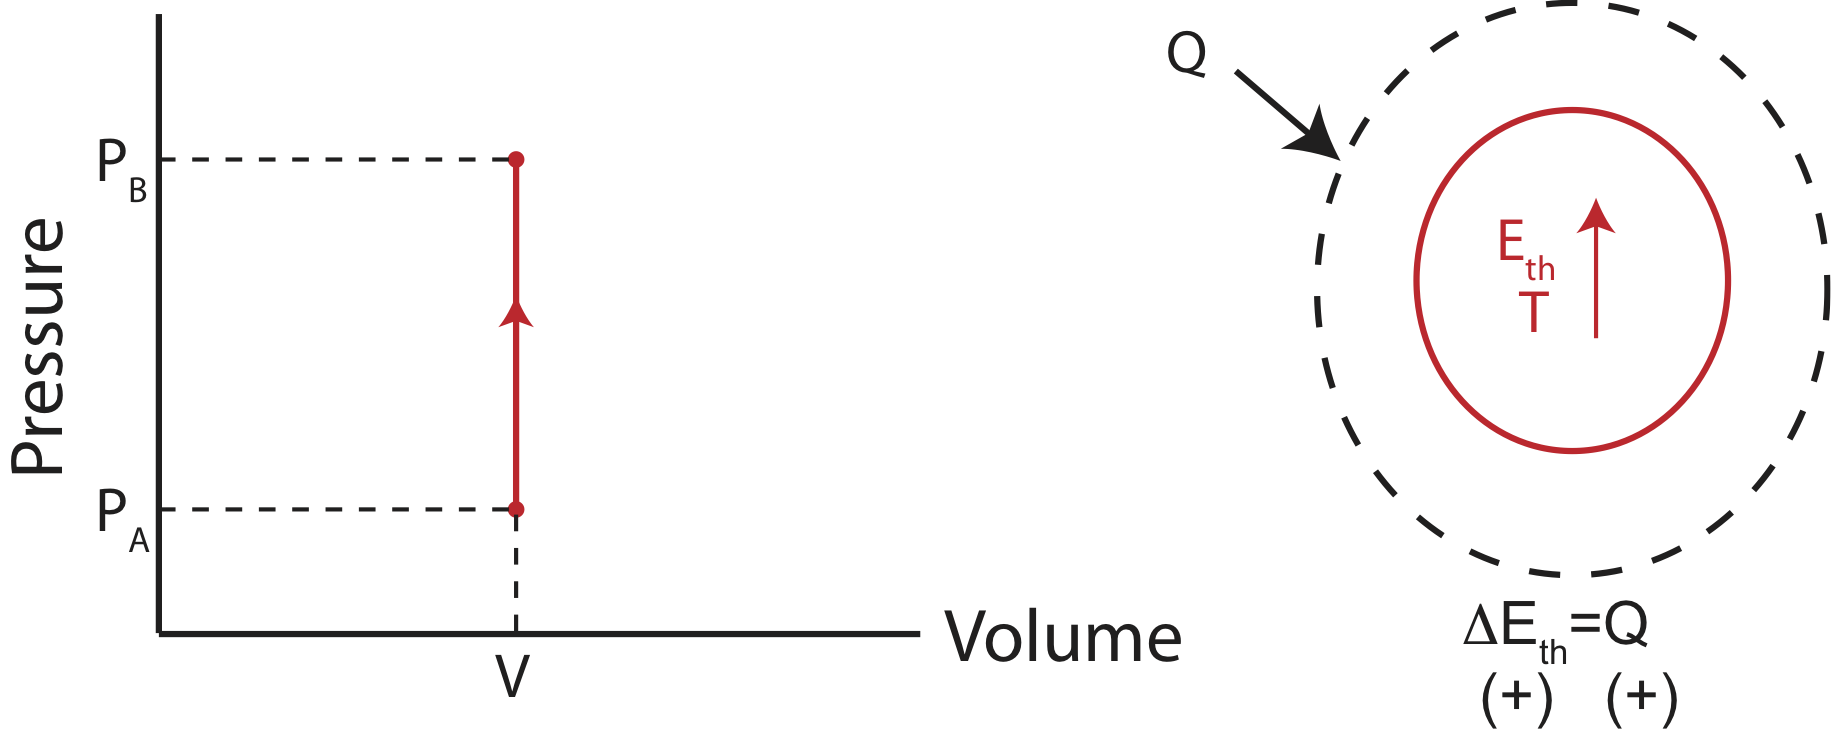 PV-diagram-isochoric.png